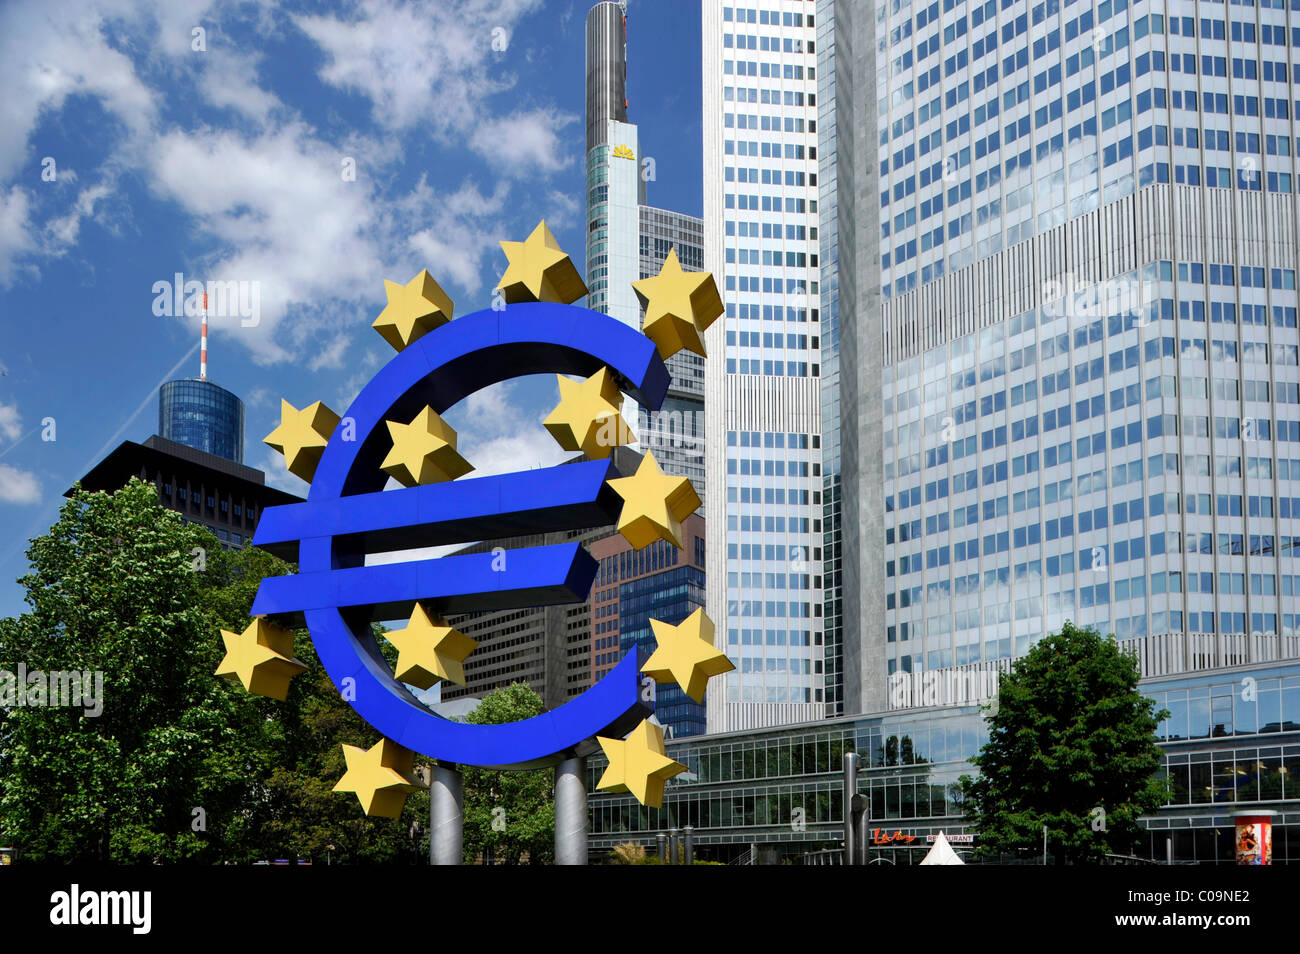 Euro sign, Commerzbank Tower, European Central Bank, ECB, Willy-Brandt-Platz square, financial district, Frankfurt am Main Stock Photo